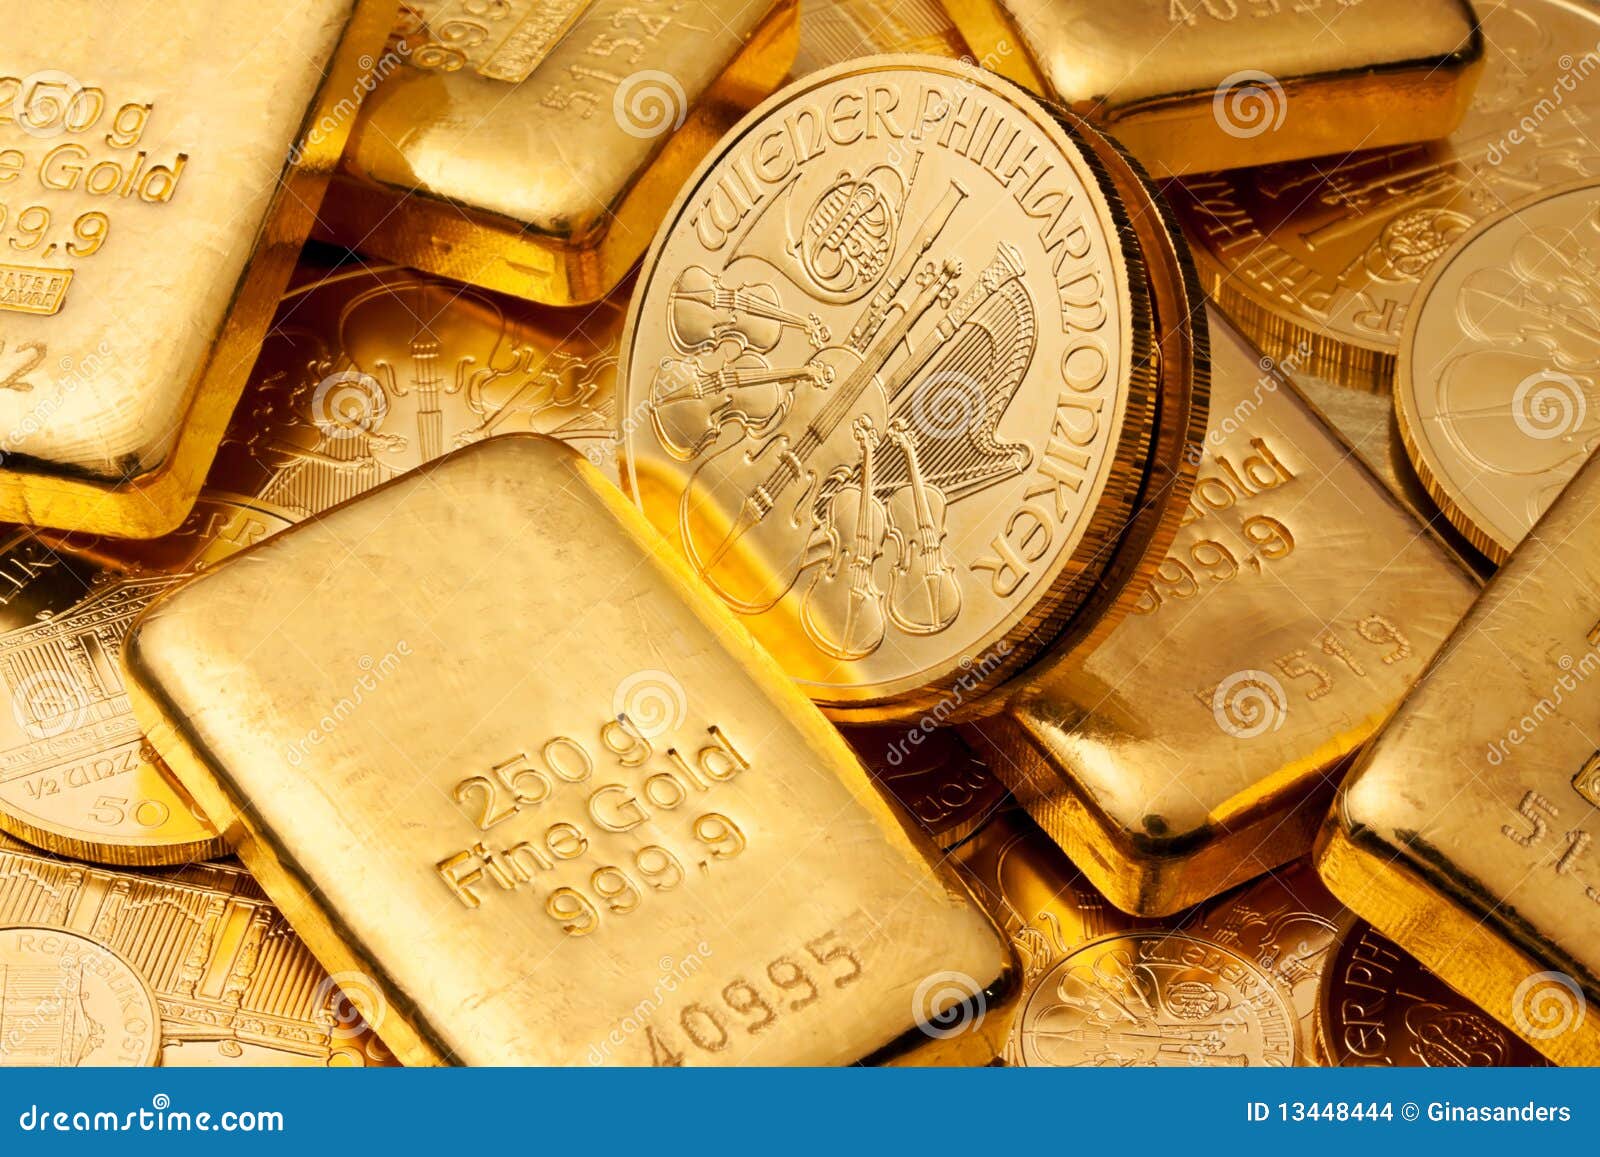 what is ira approved gold